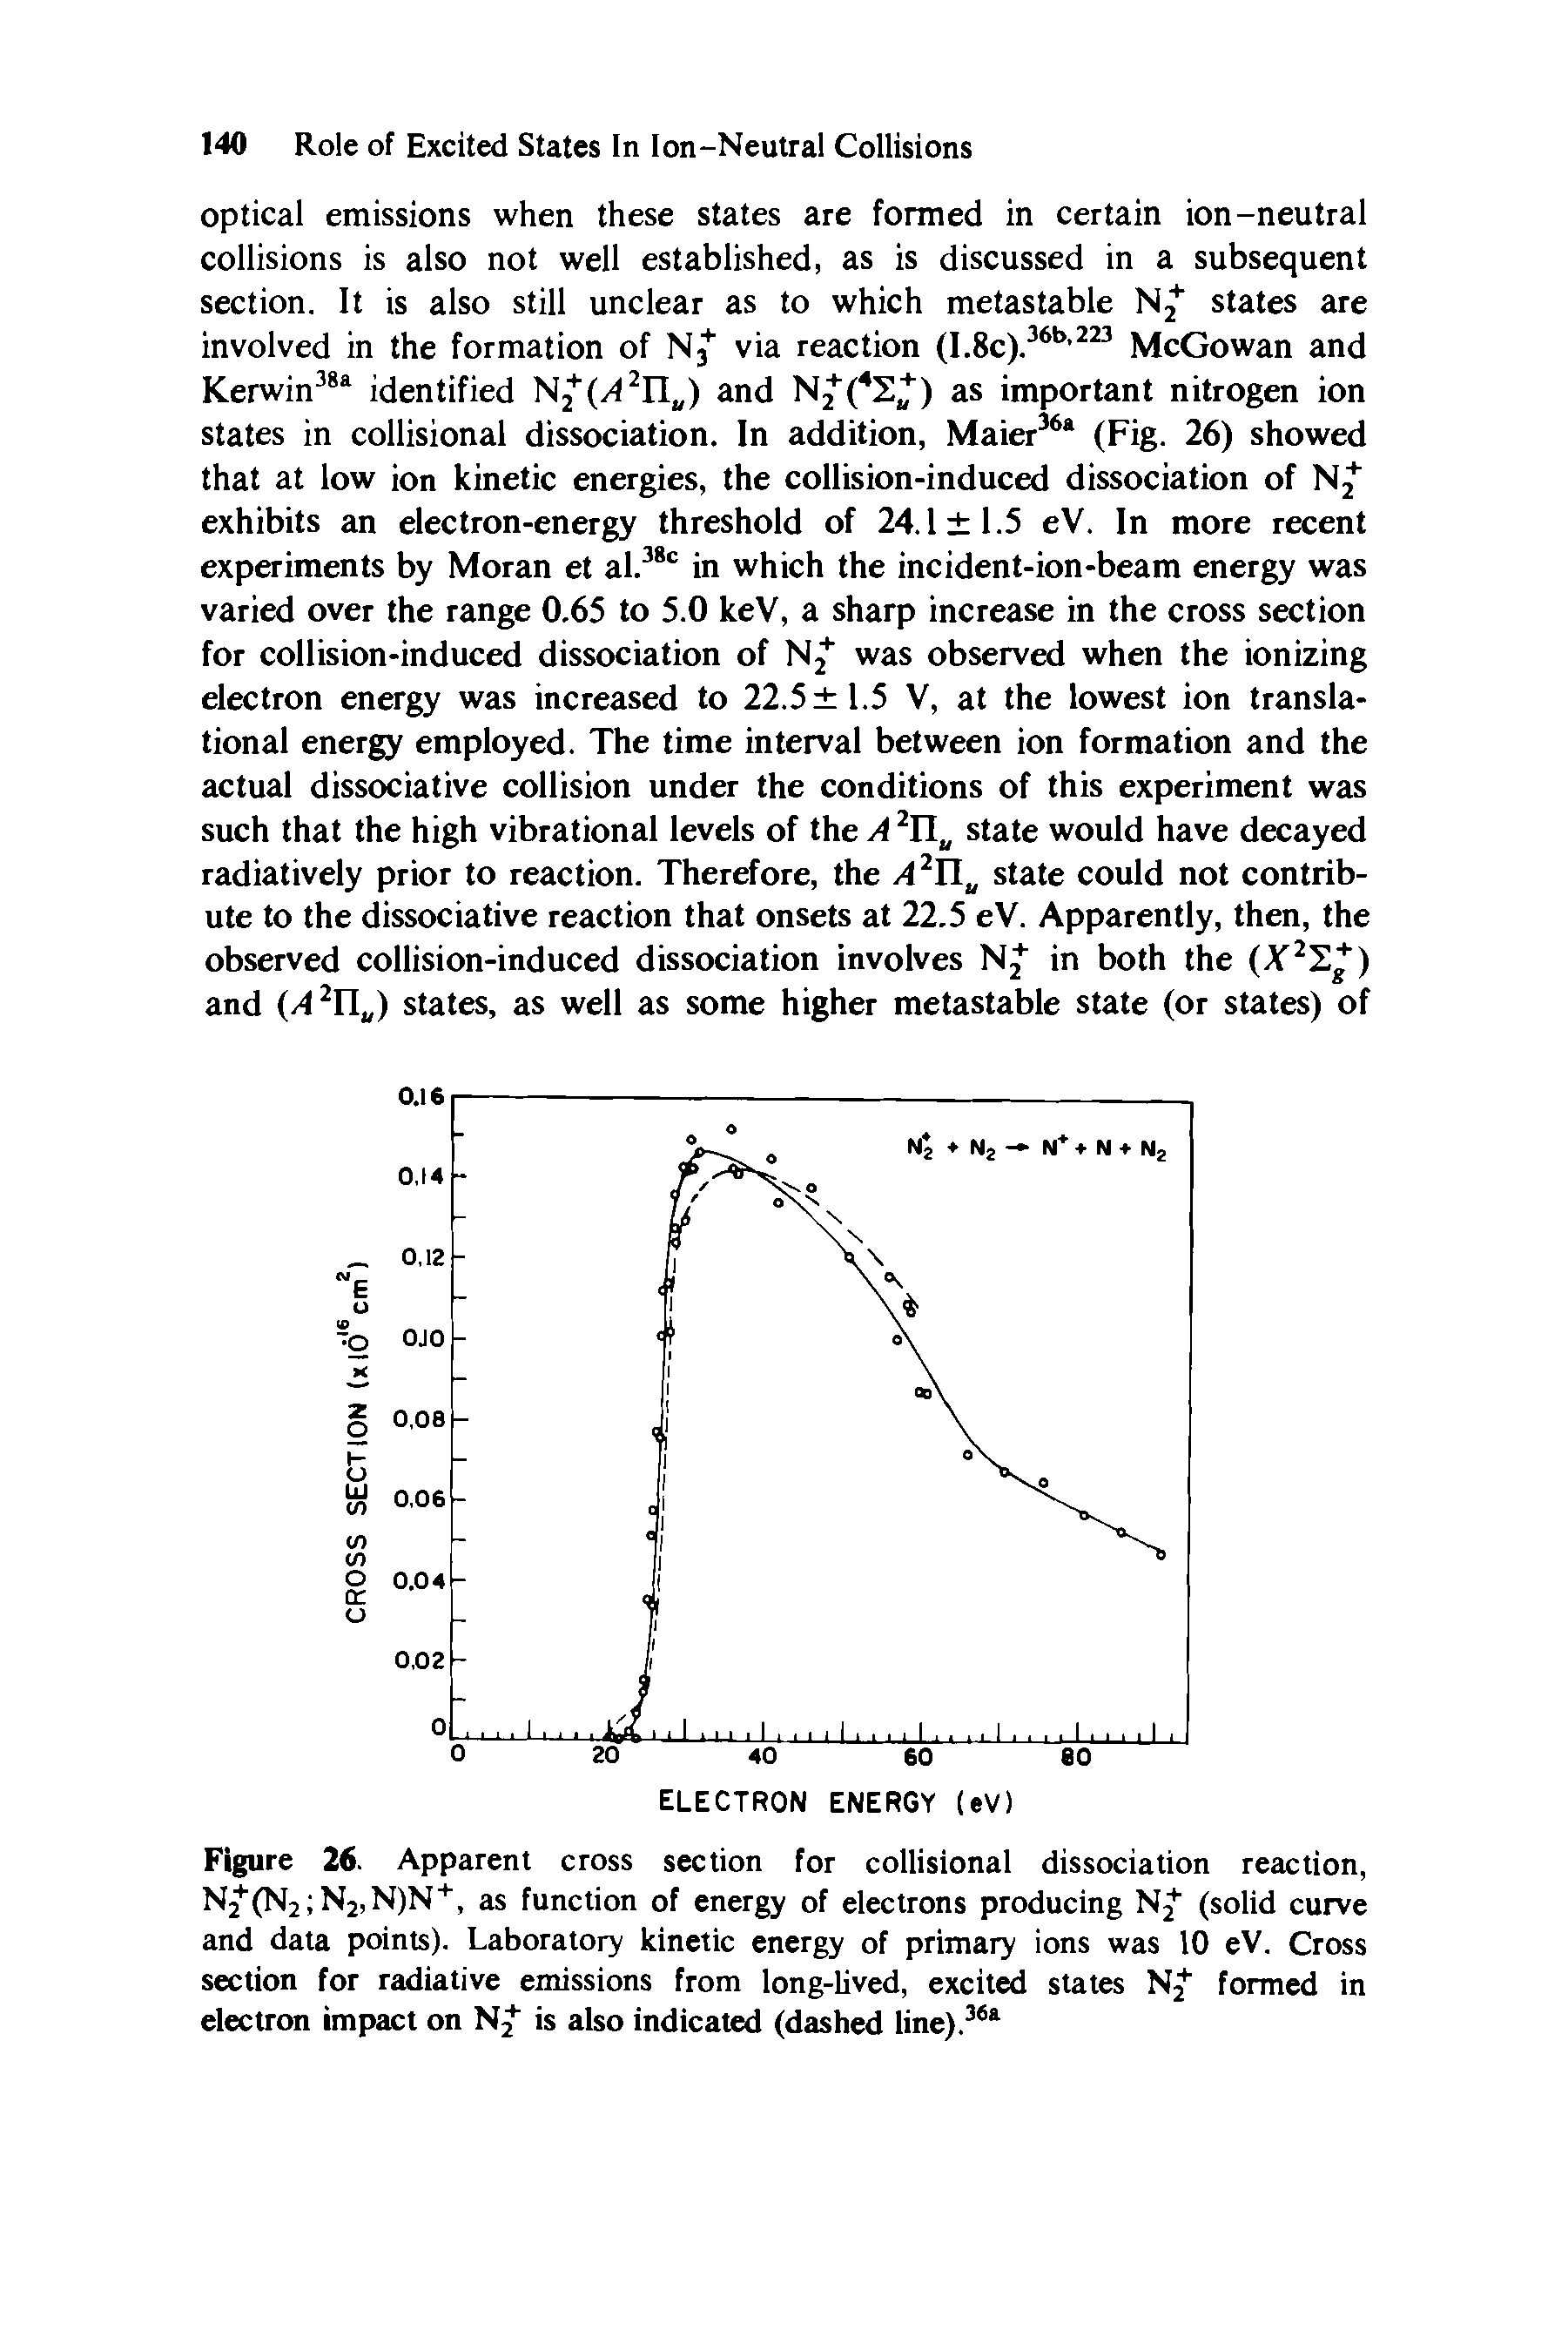 Figure 26. Apparent cross section for collisional dissociation reaction, N2+(N2 N2,N)N+, as function of energy of electrons producing Nj" (solid curve and data points). Laboratory kinetic energy of primary ions was 10 eV. Cross section for radiative emissions from long-lived, excited states formed in electron impact on N- is also indicated (dashed line).36a...